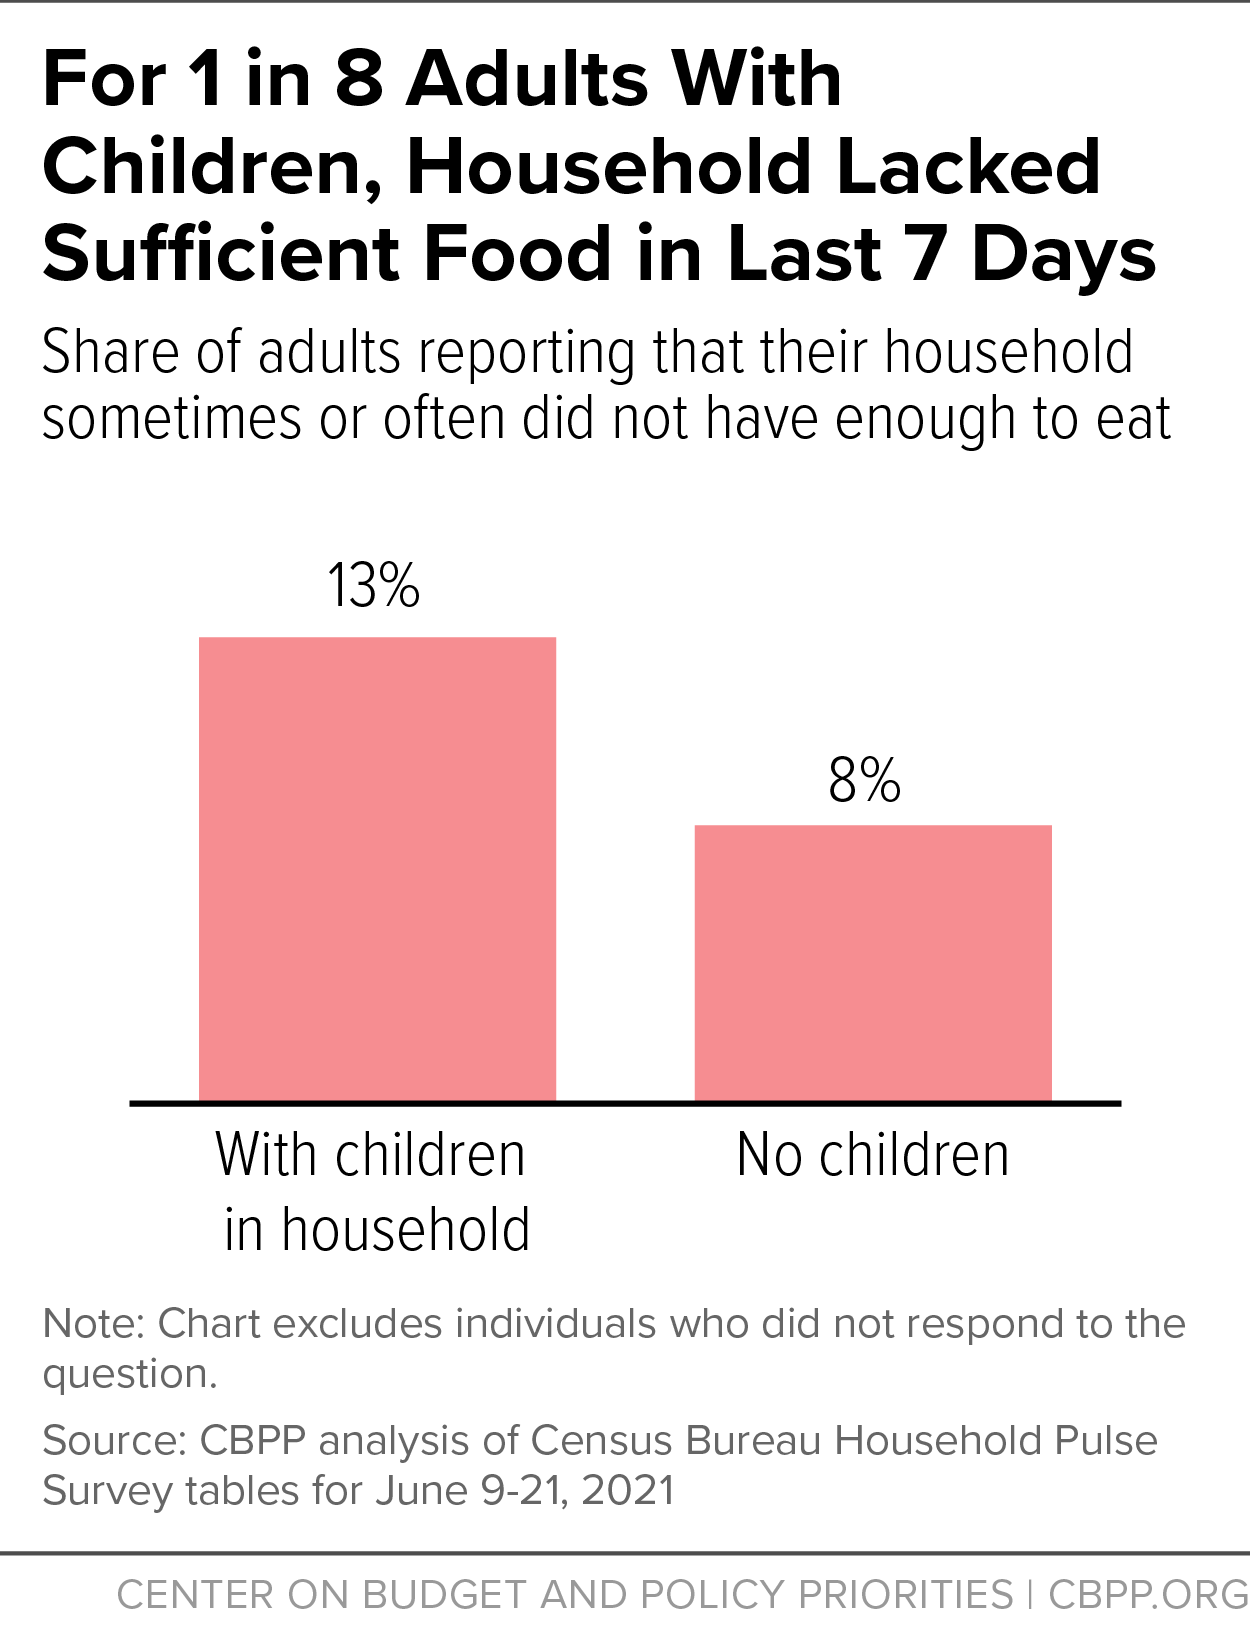 For 1 in 8 Adults With Children, Households Lacked Sufficient Food in Last 7 Days